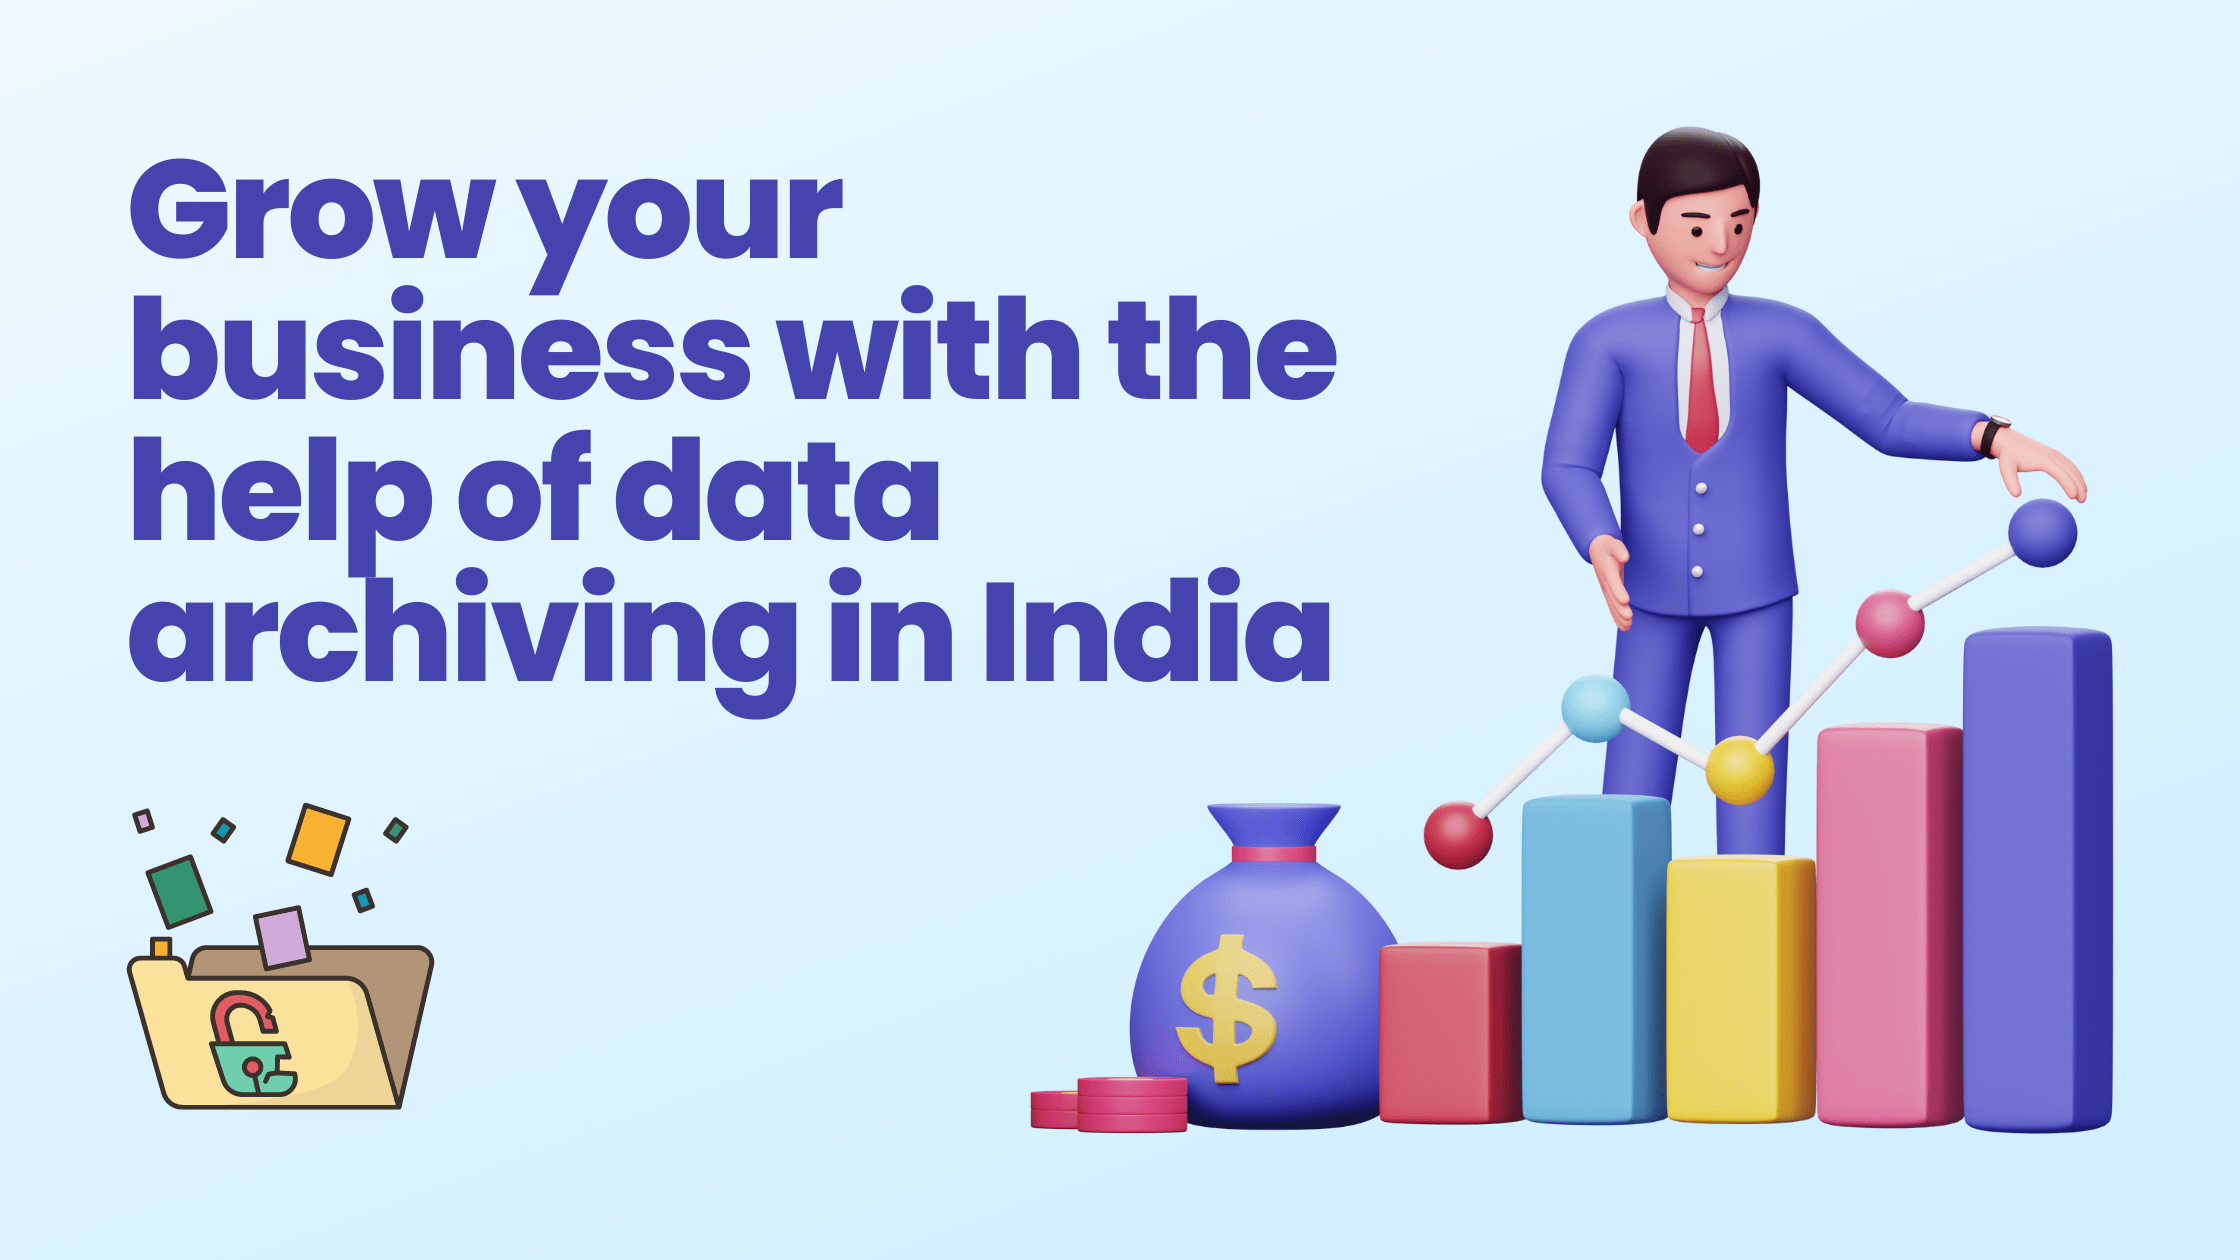 Grow your business with the help of data archiving in India